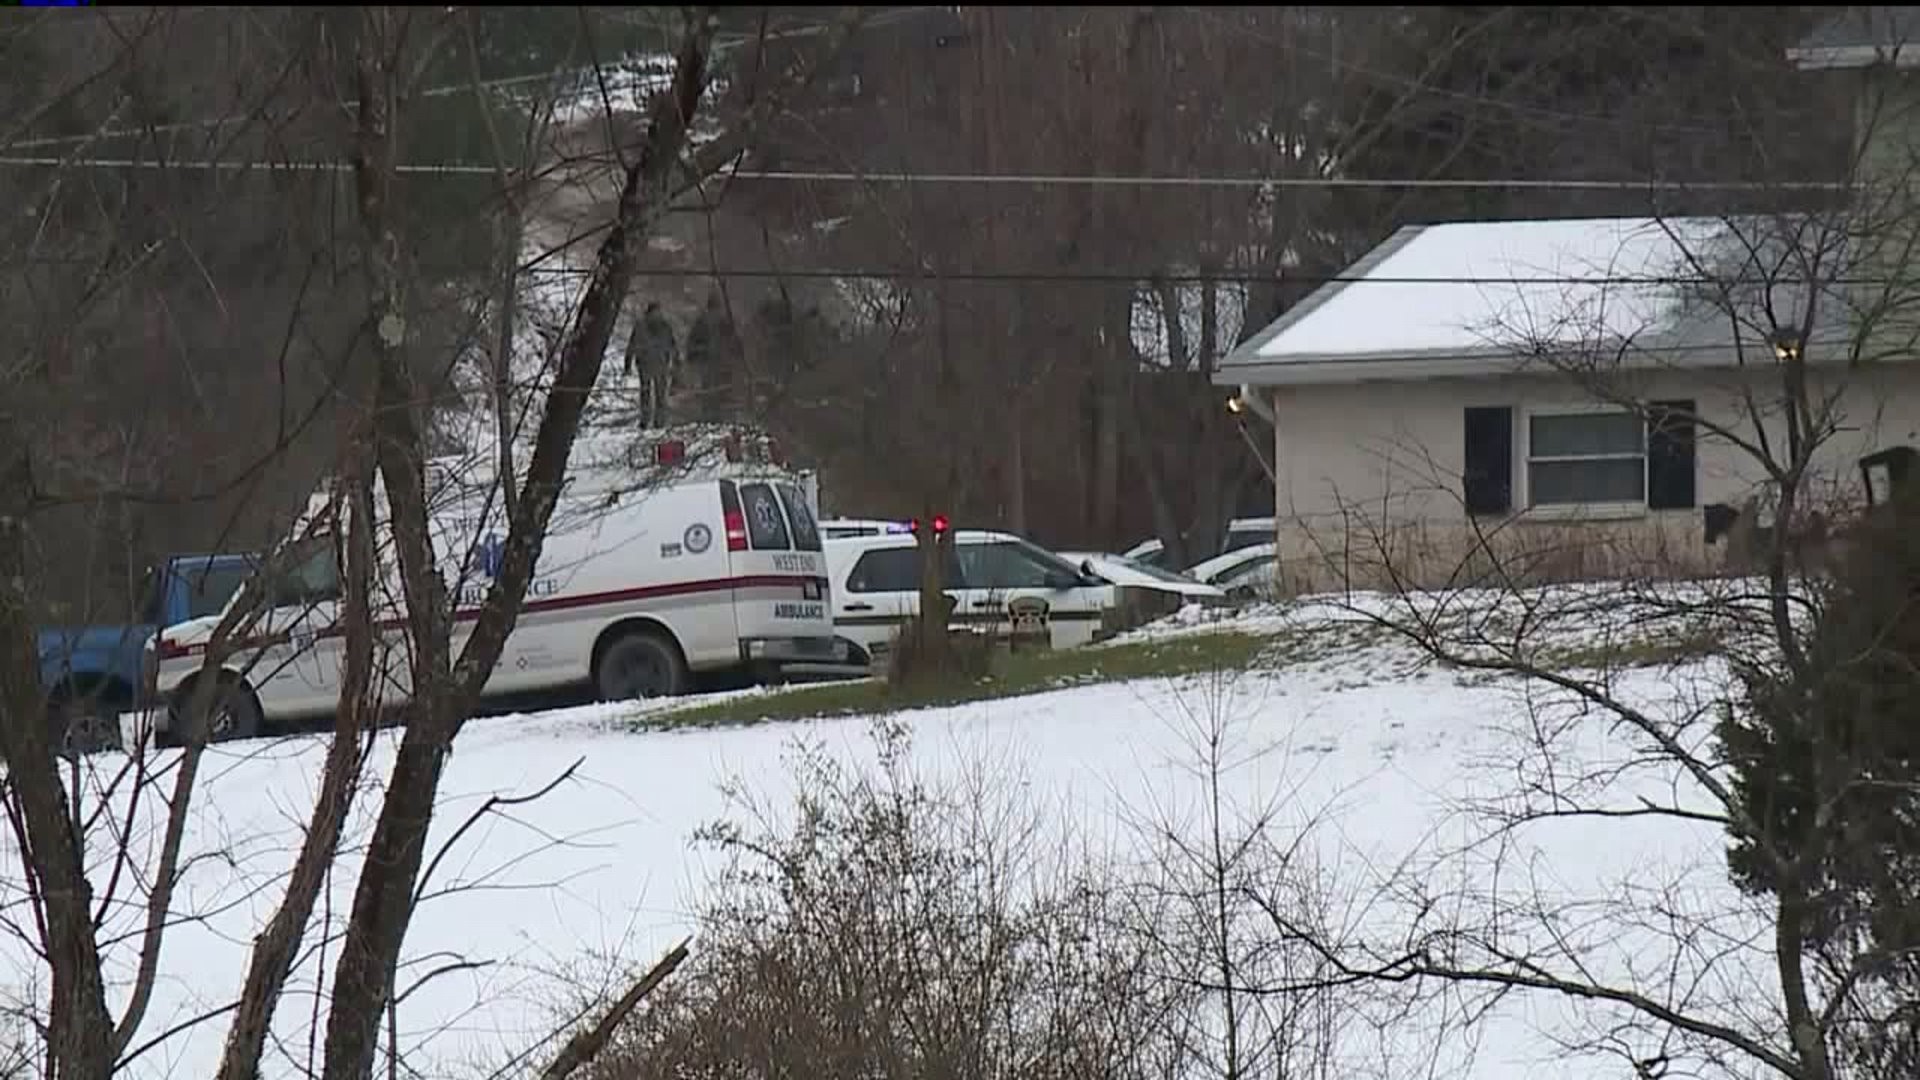 Neighbors Surprised After Standoff in Monroe County